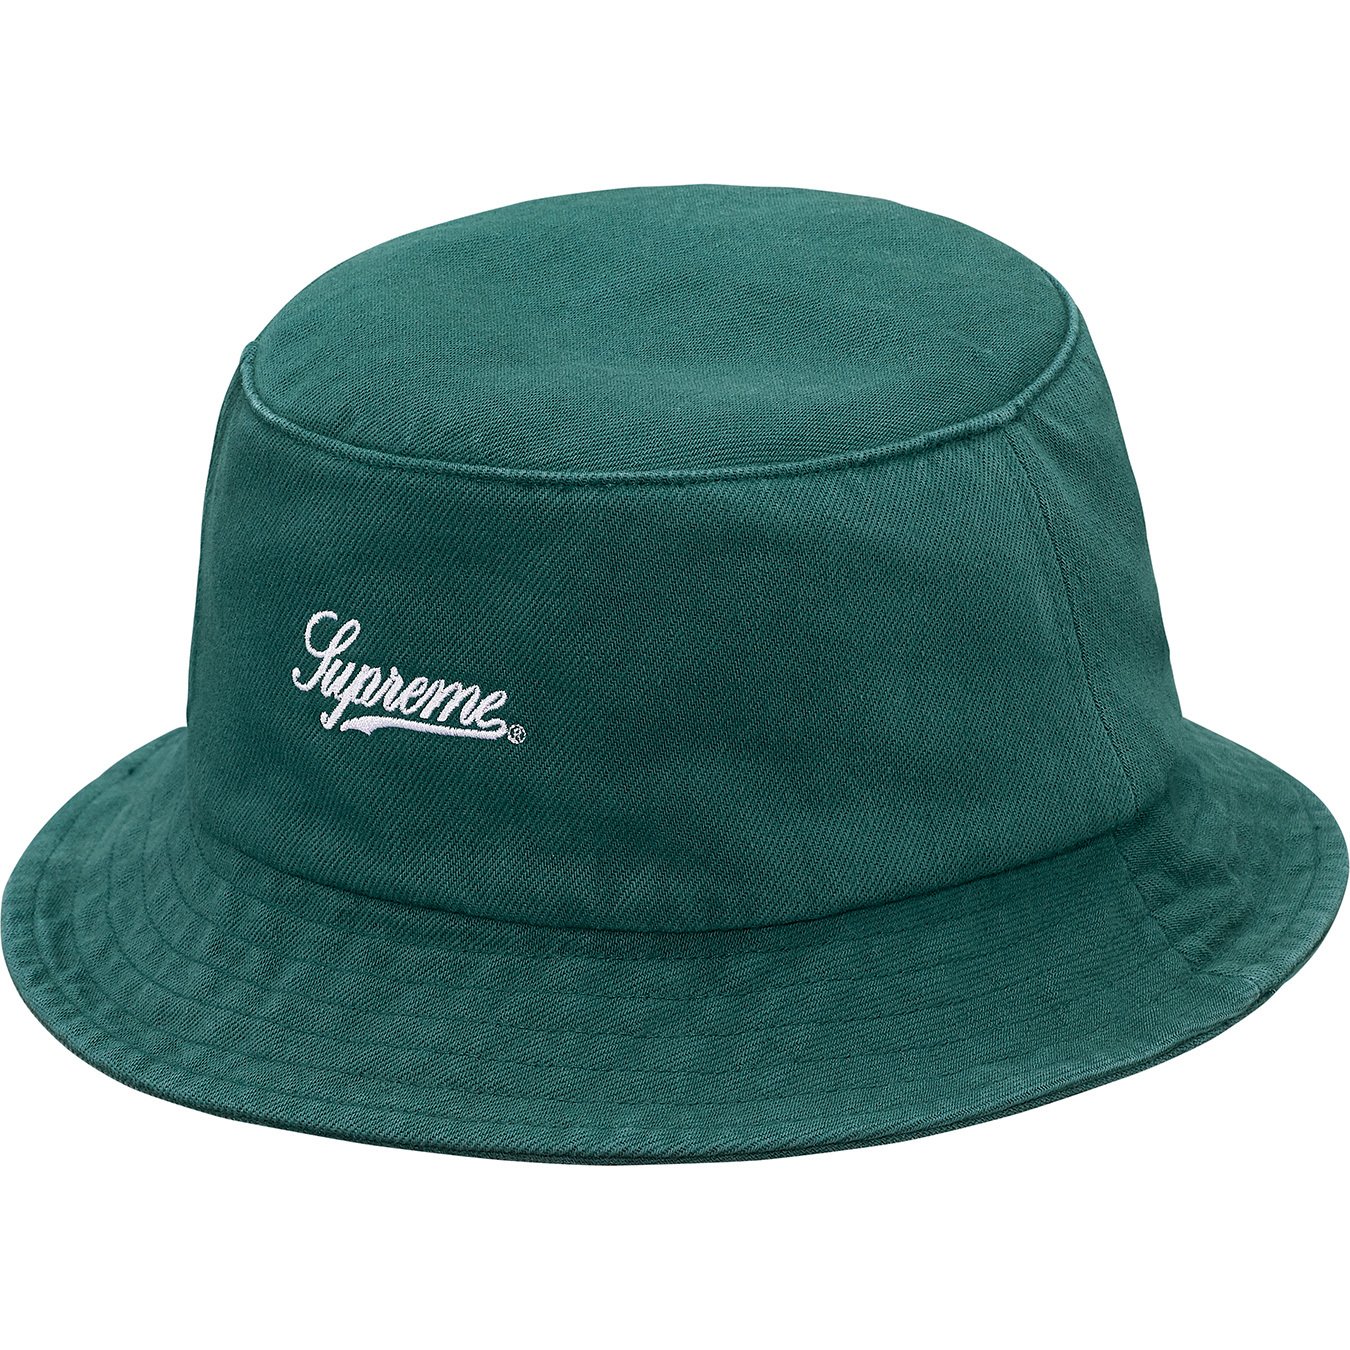 Supreme Zip Twill Crusher Dusty Teal - SS18 - US